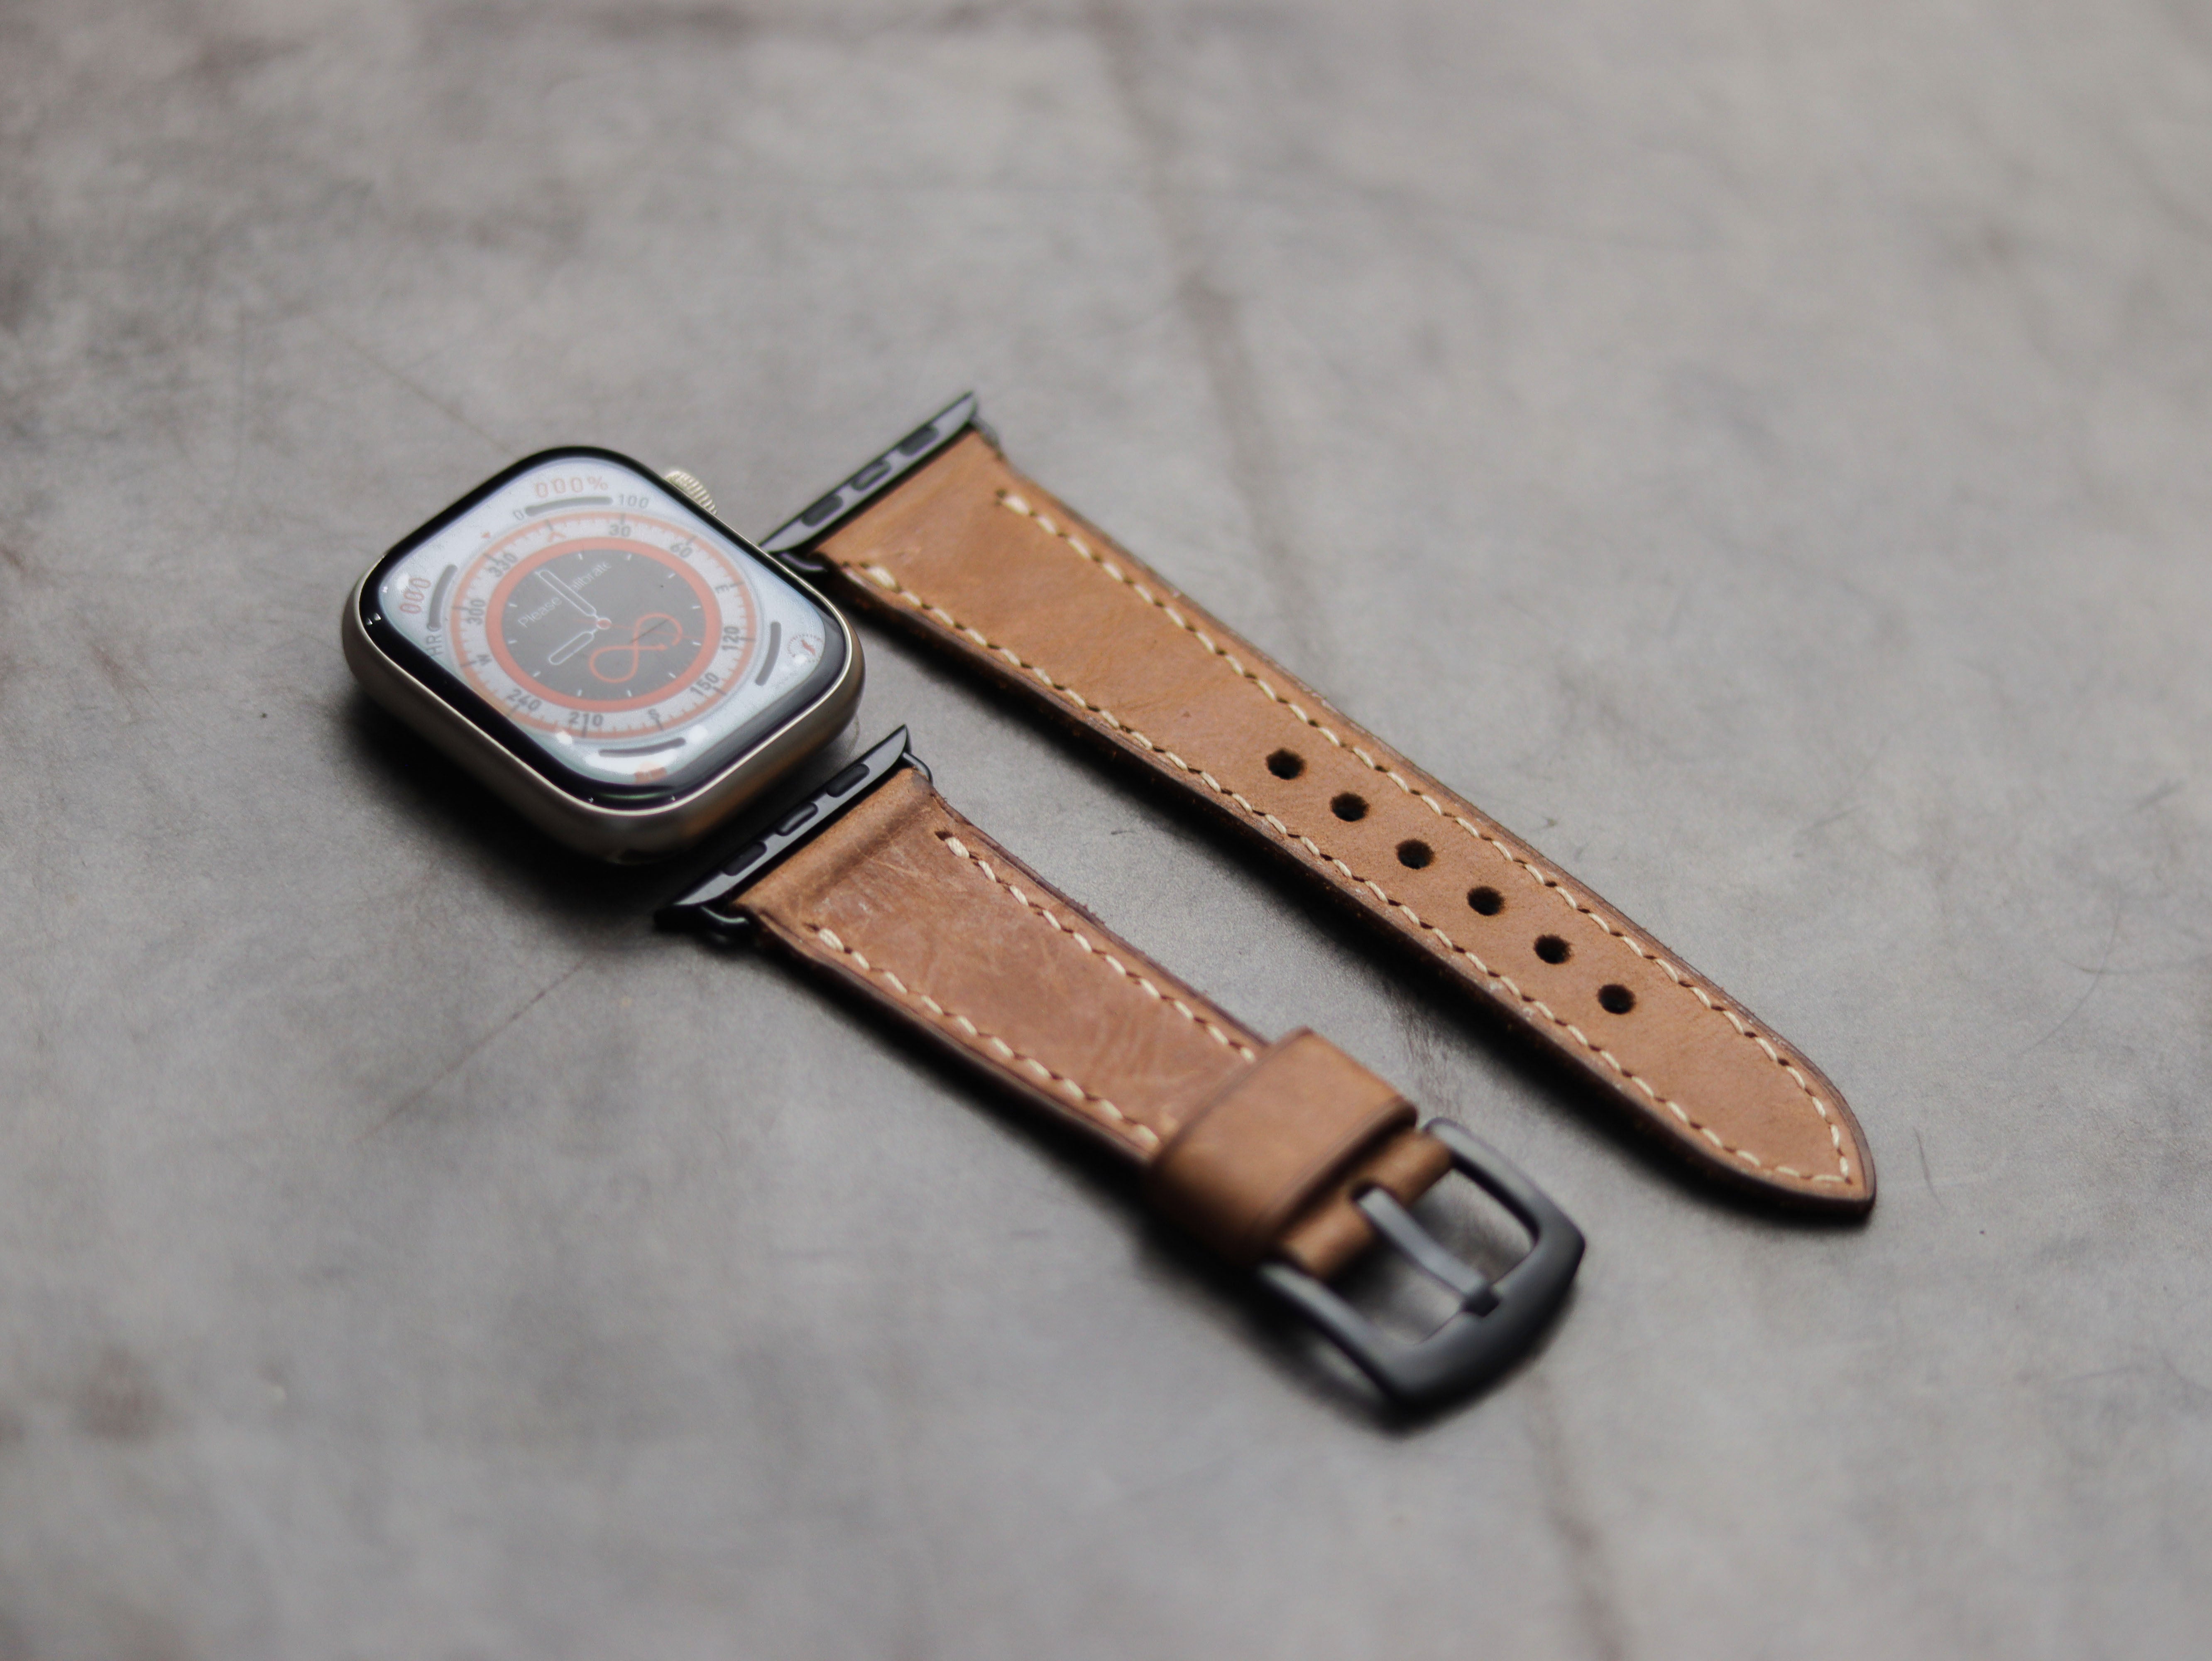 RUSTY BROWN LEATHER - APPLE WATCH STRAPS HAND-CRAFTED